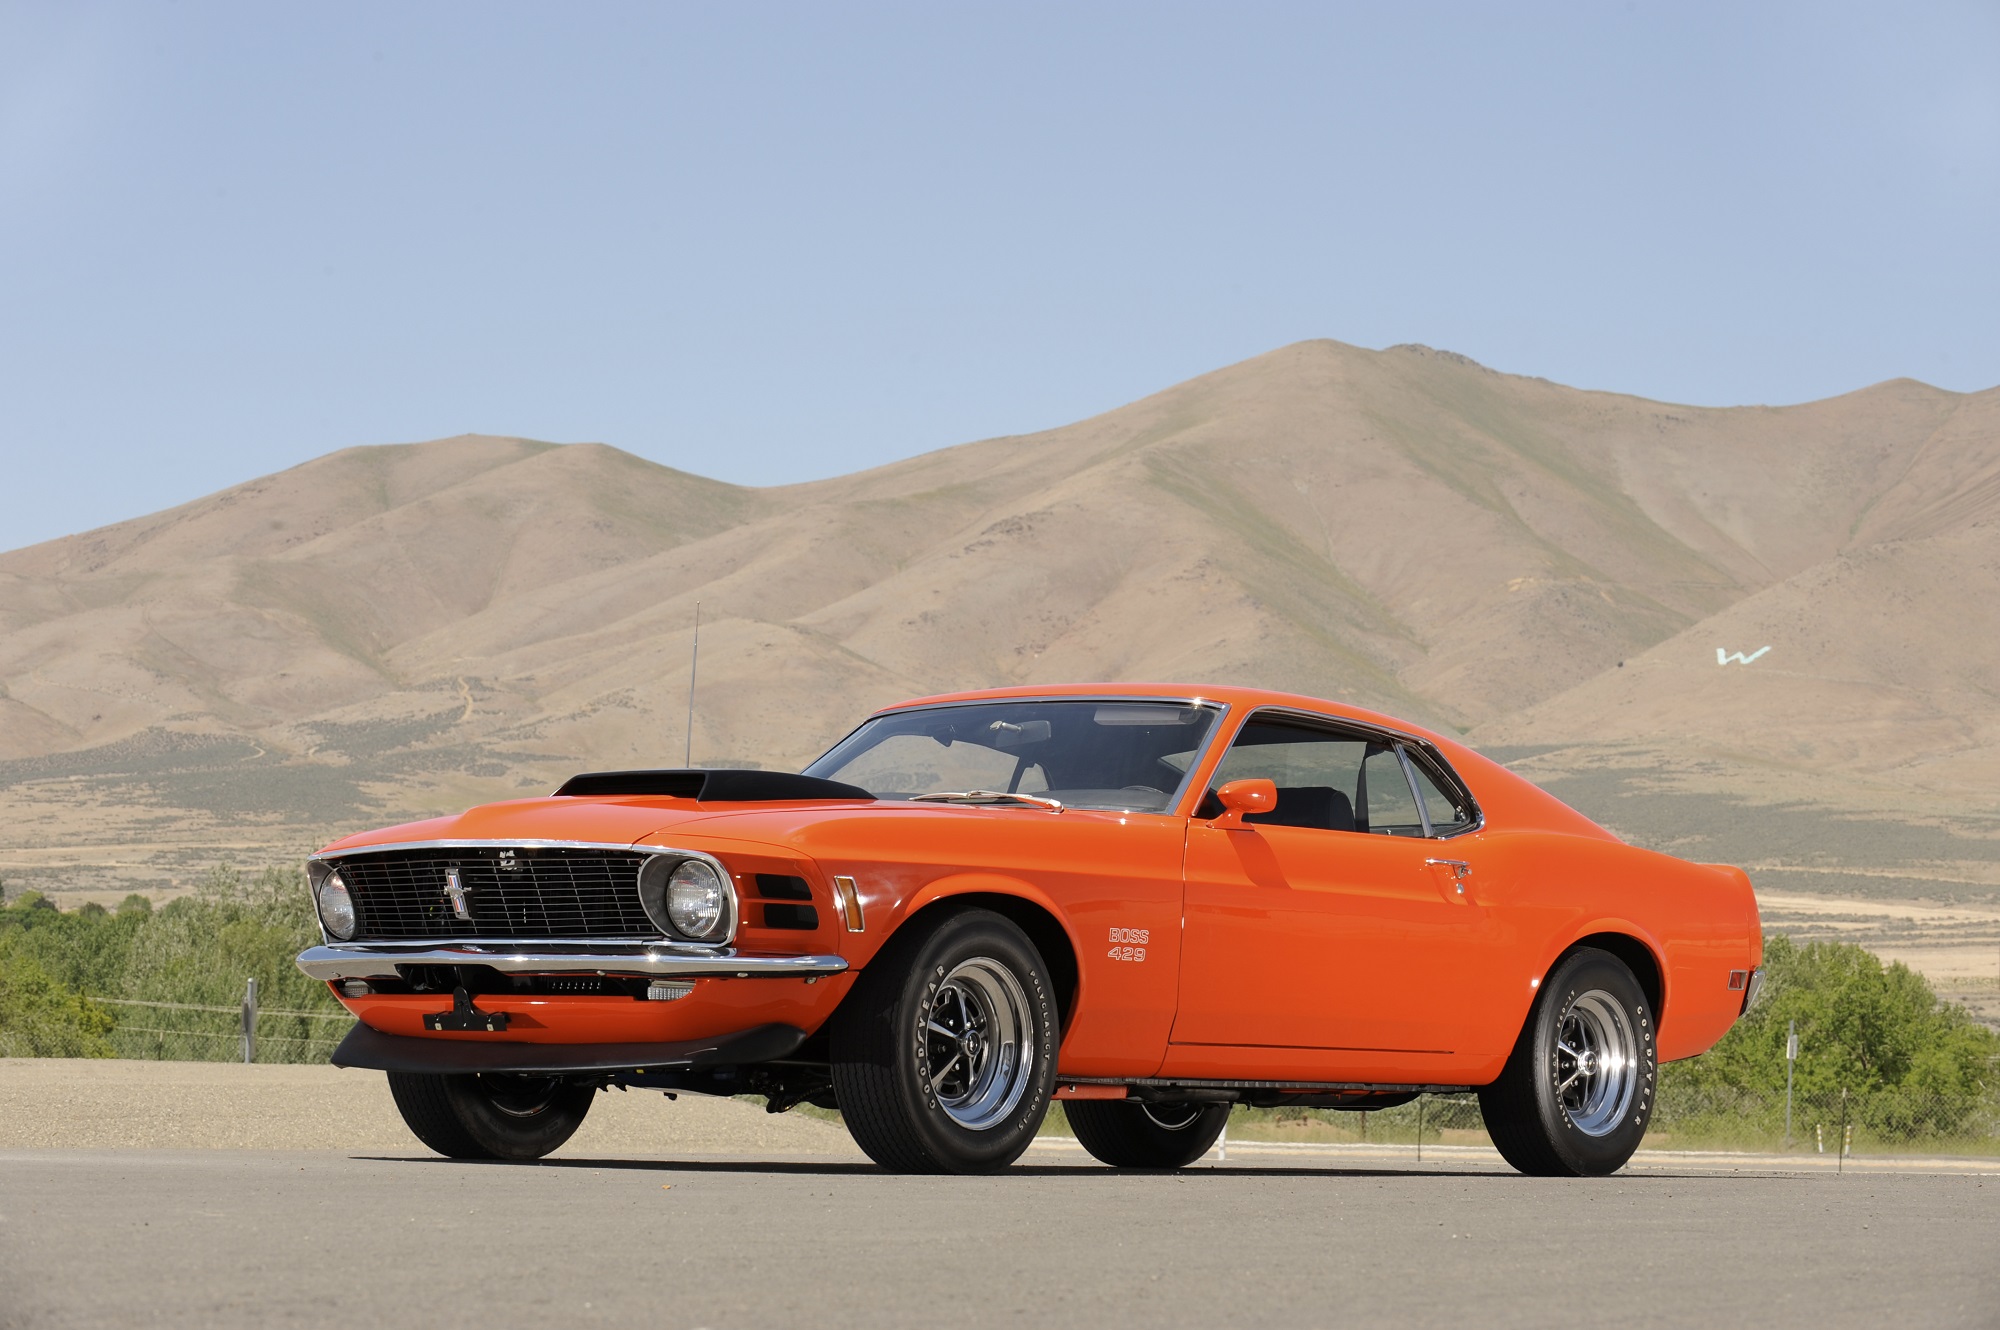 Mustang Boss 429: The Biggest Ford Mustang Engine?